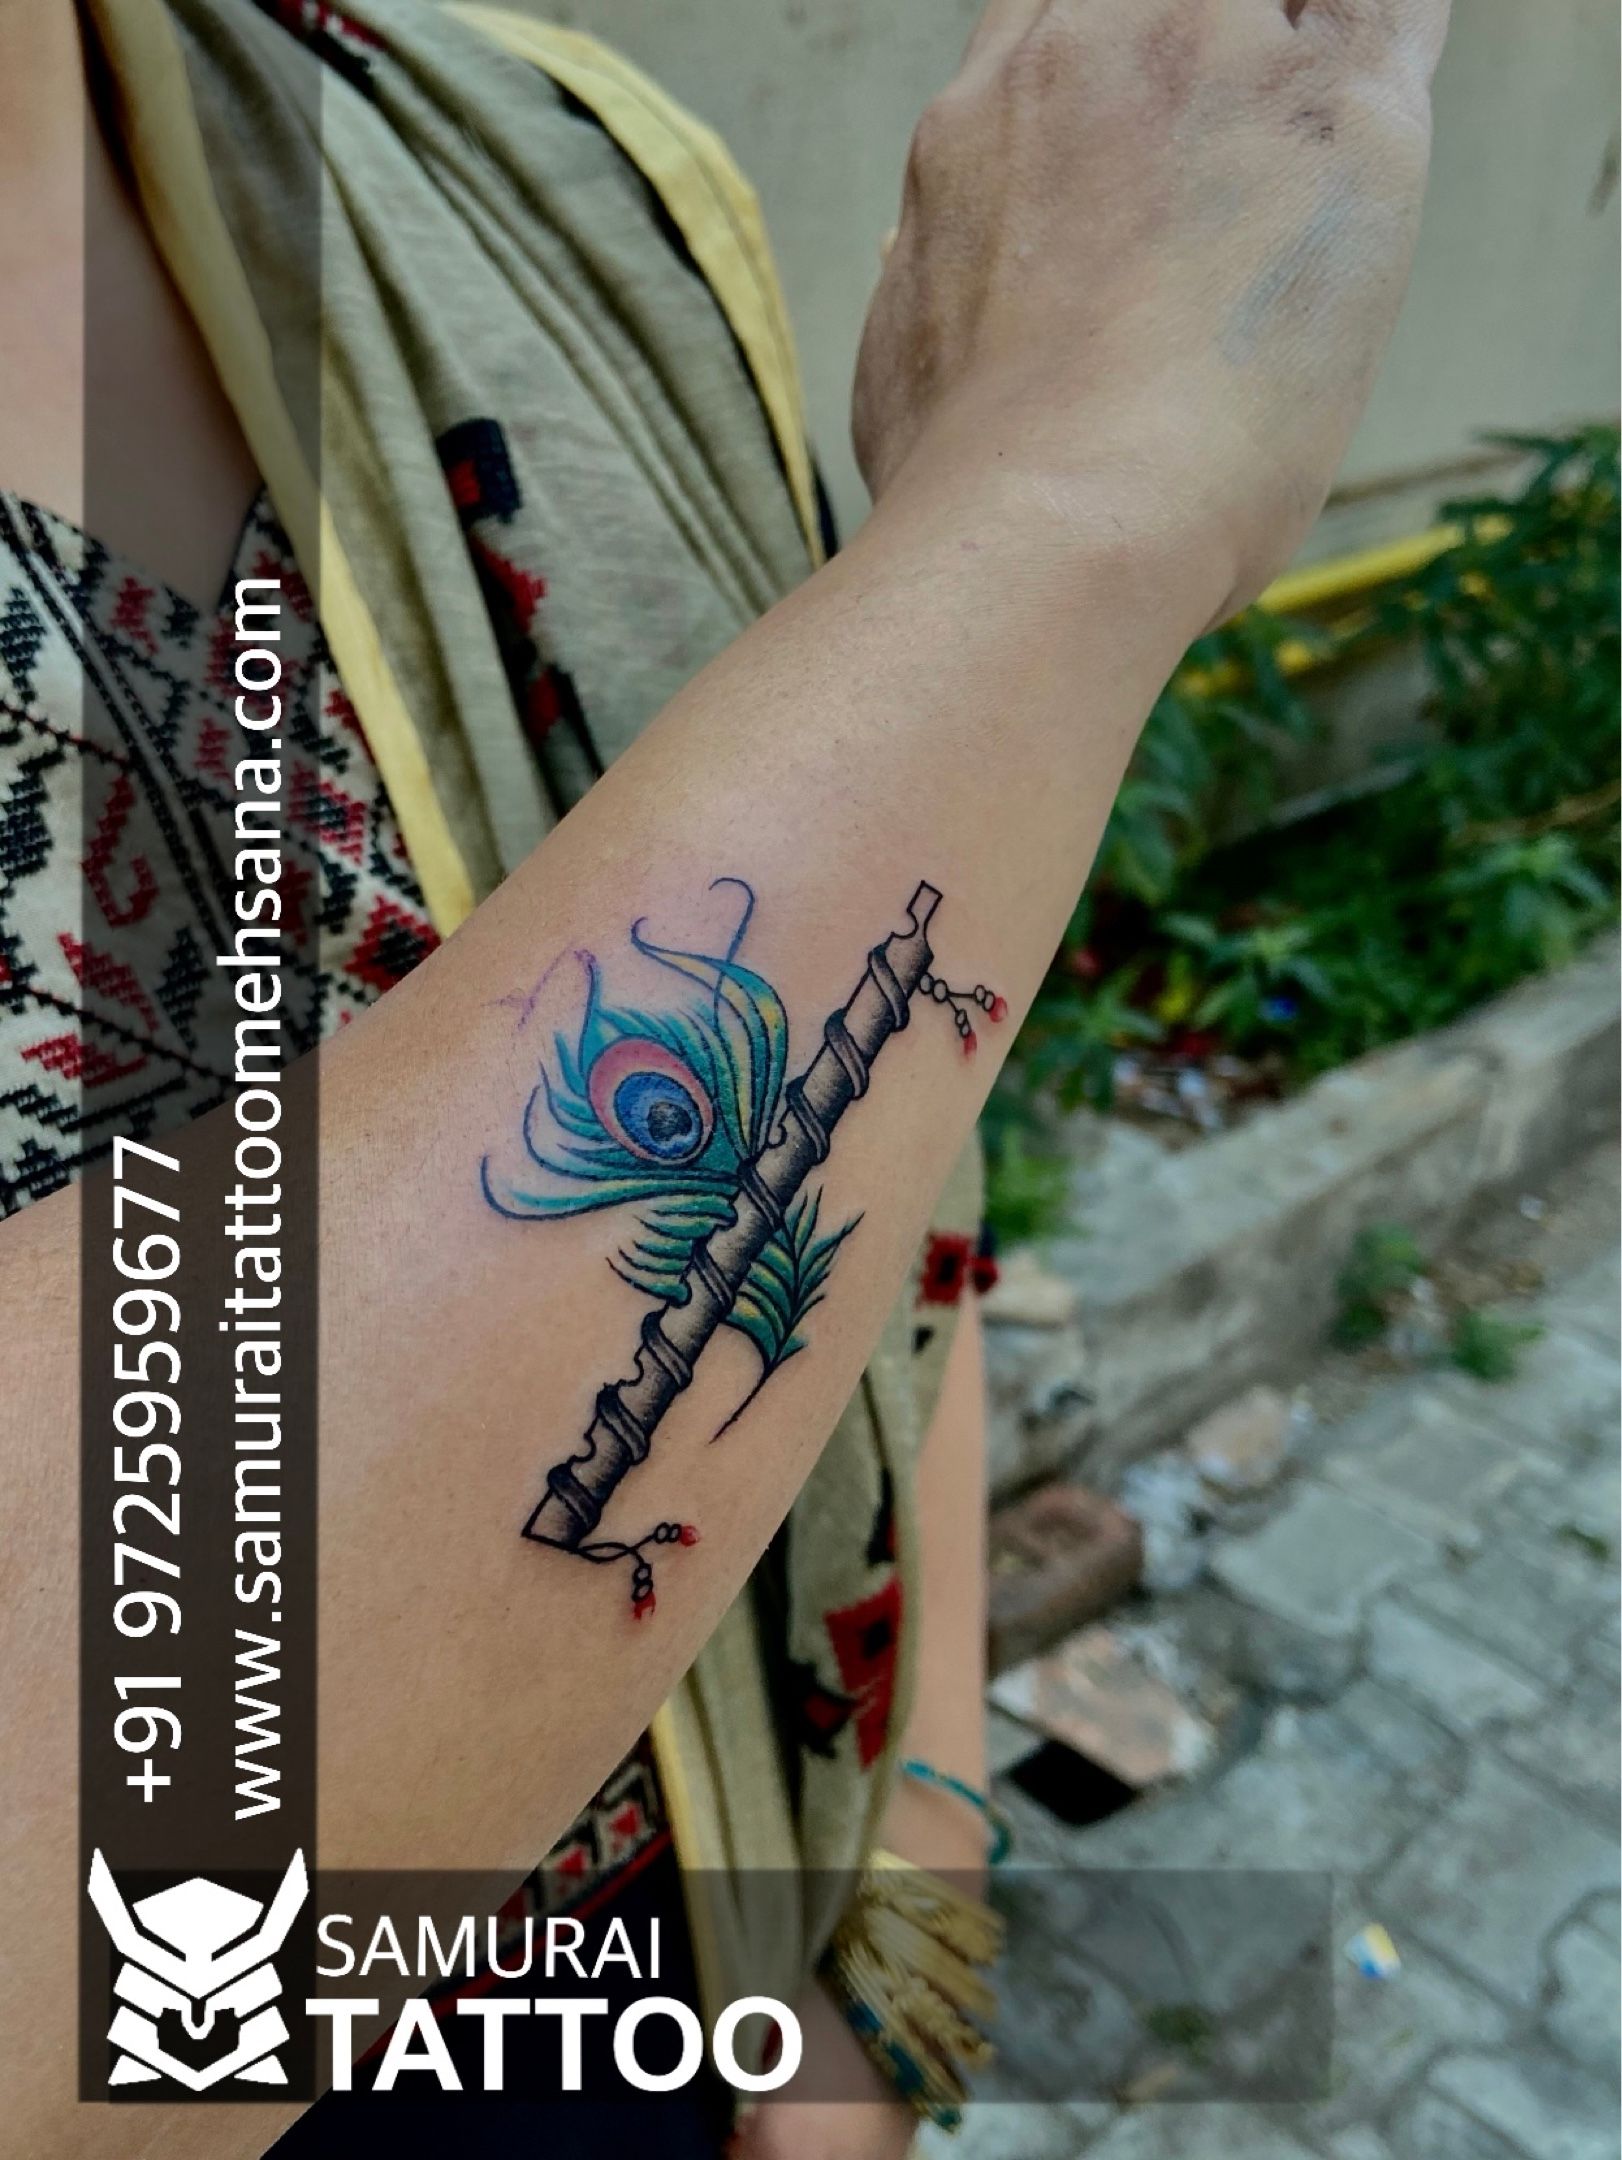 flute feather tattoo designs    9016844441 call now for  appointment  Tattoo Adda rajkot Gujarat  peacock feather flute   Instagram